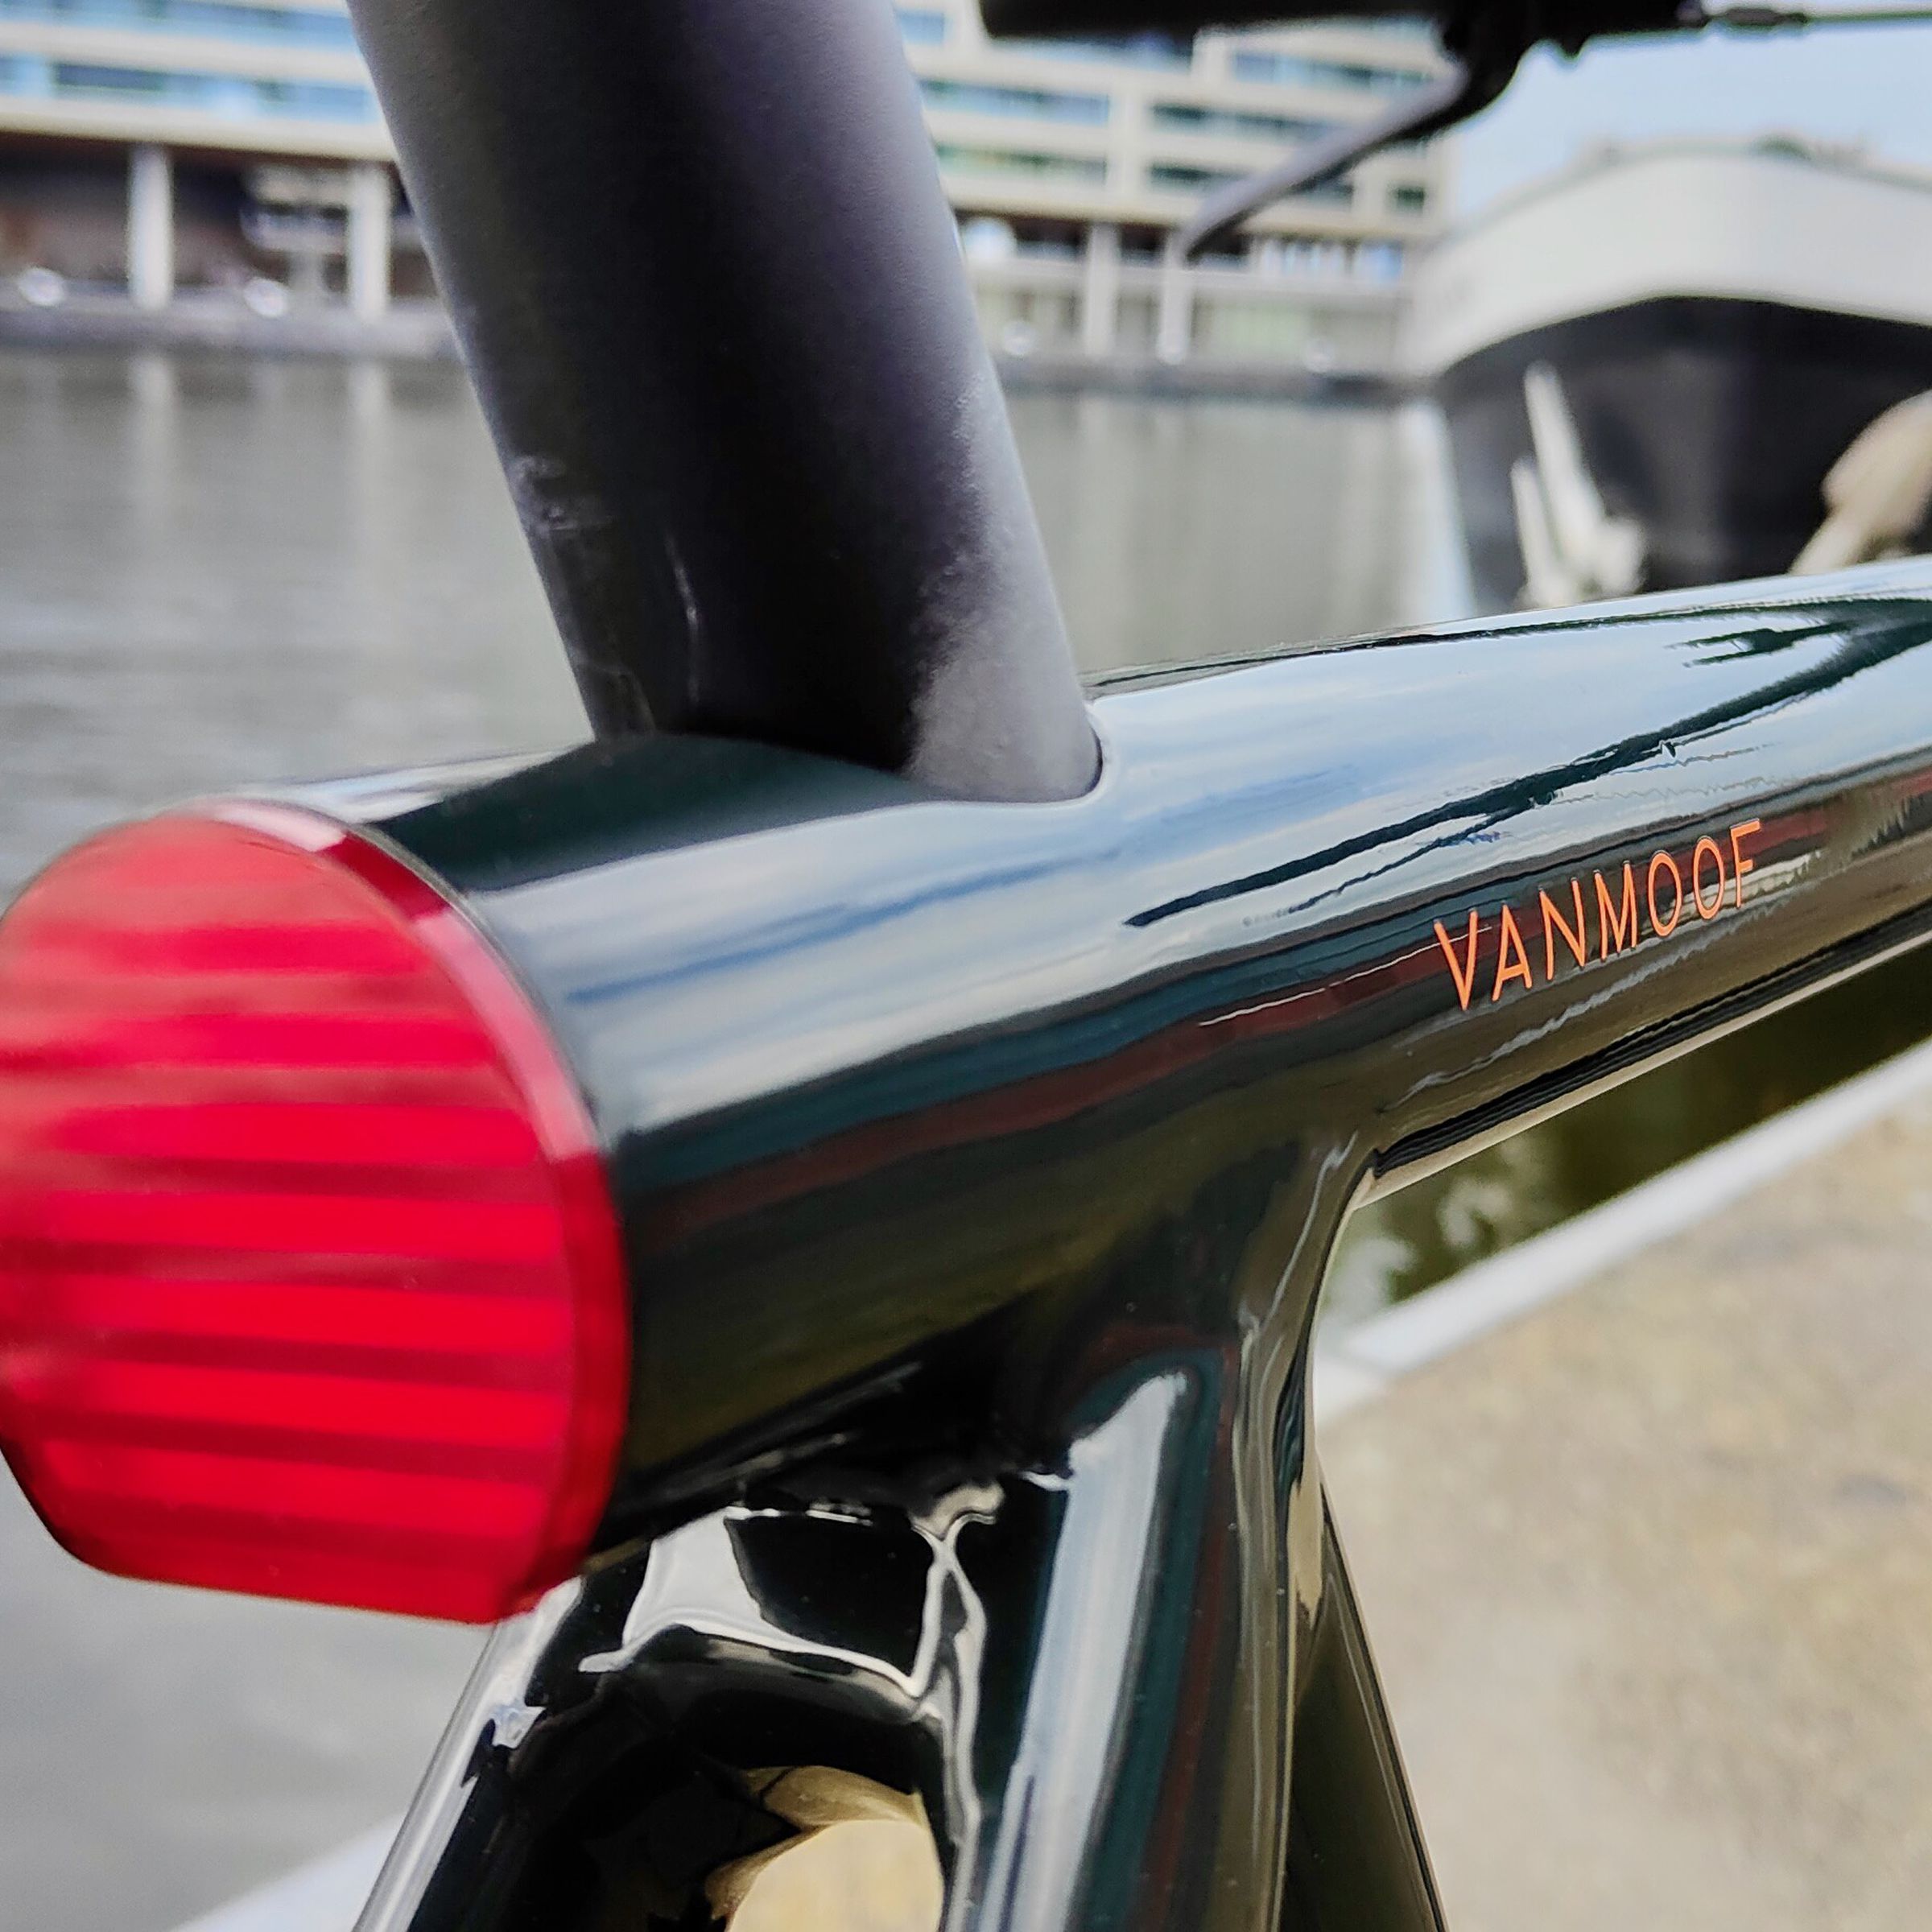 A zoomed in photo of a VanMoof e-bike from the rear light looking past the VanMoof logo and down the top tube to a distant ship on the horizon.